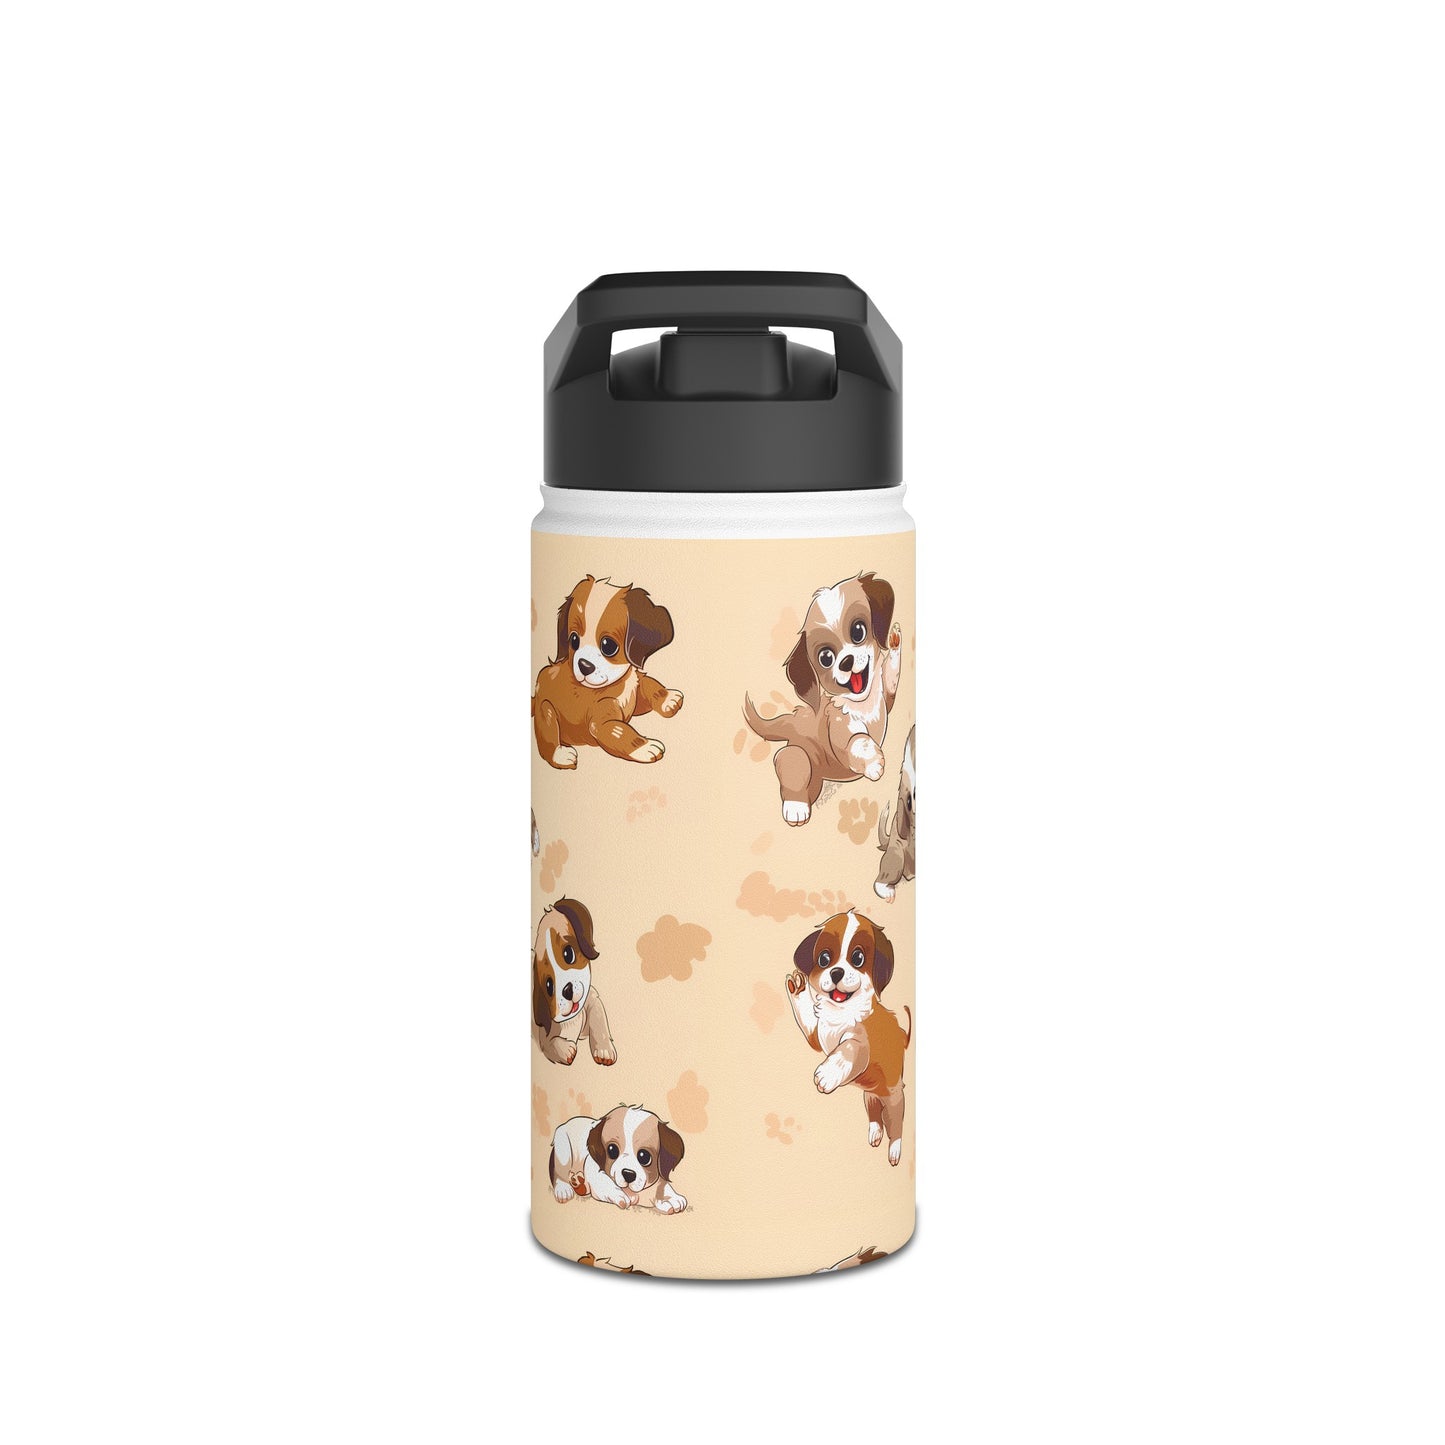 Insulated Water Bottle, 12oz, Cute Puppy Dogs - Double Walled Stainless Steel Thermos, Keeps Drinks Hot or Cold